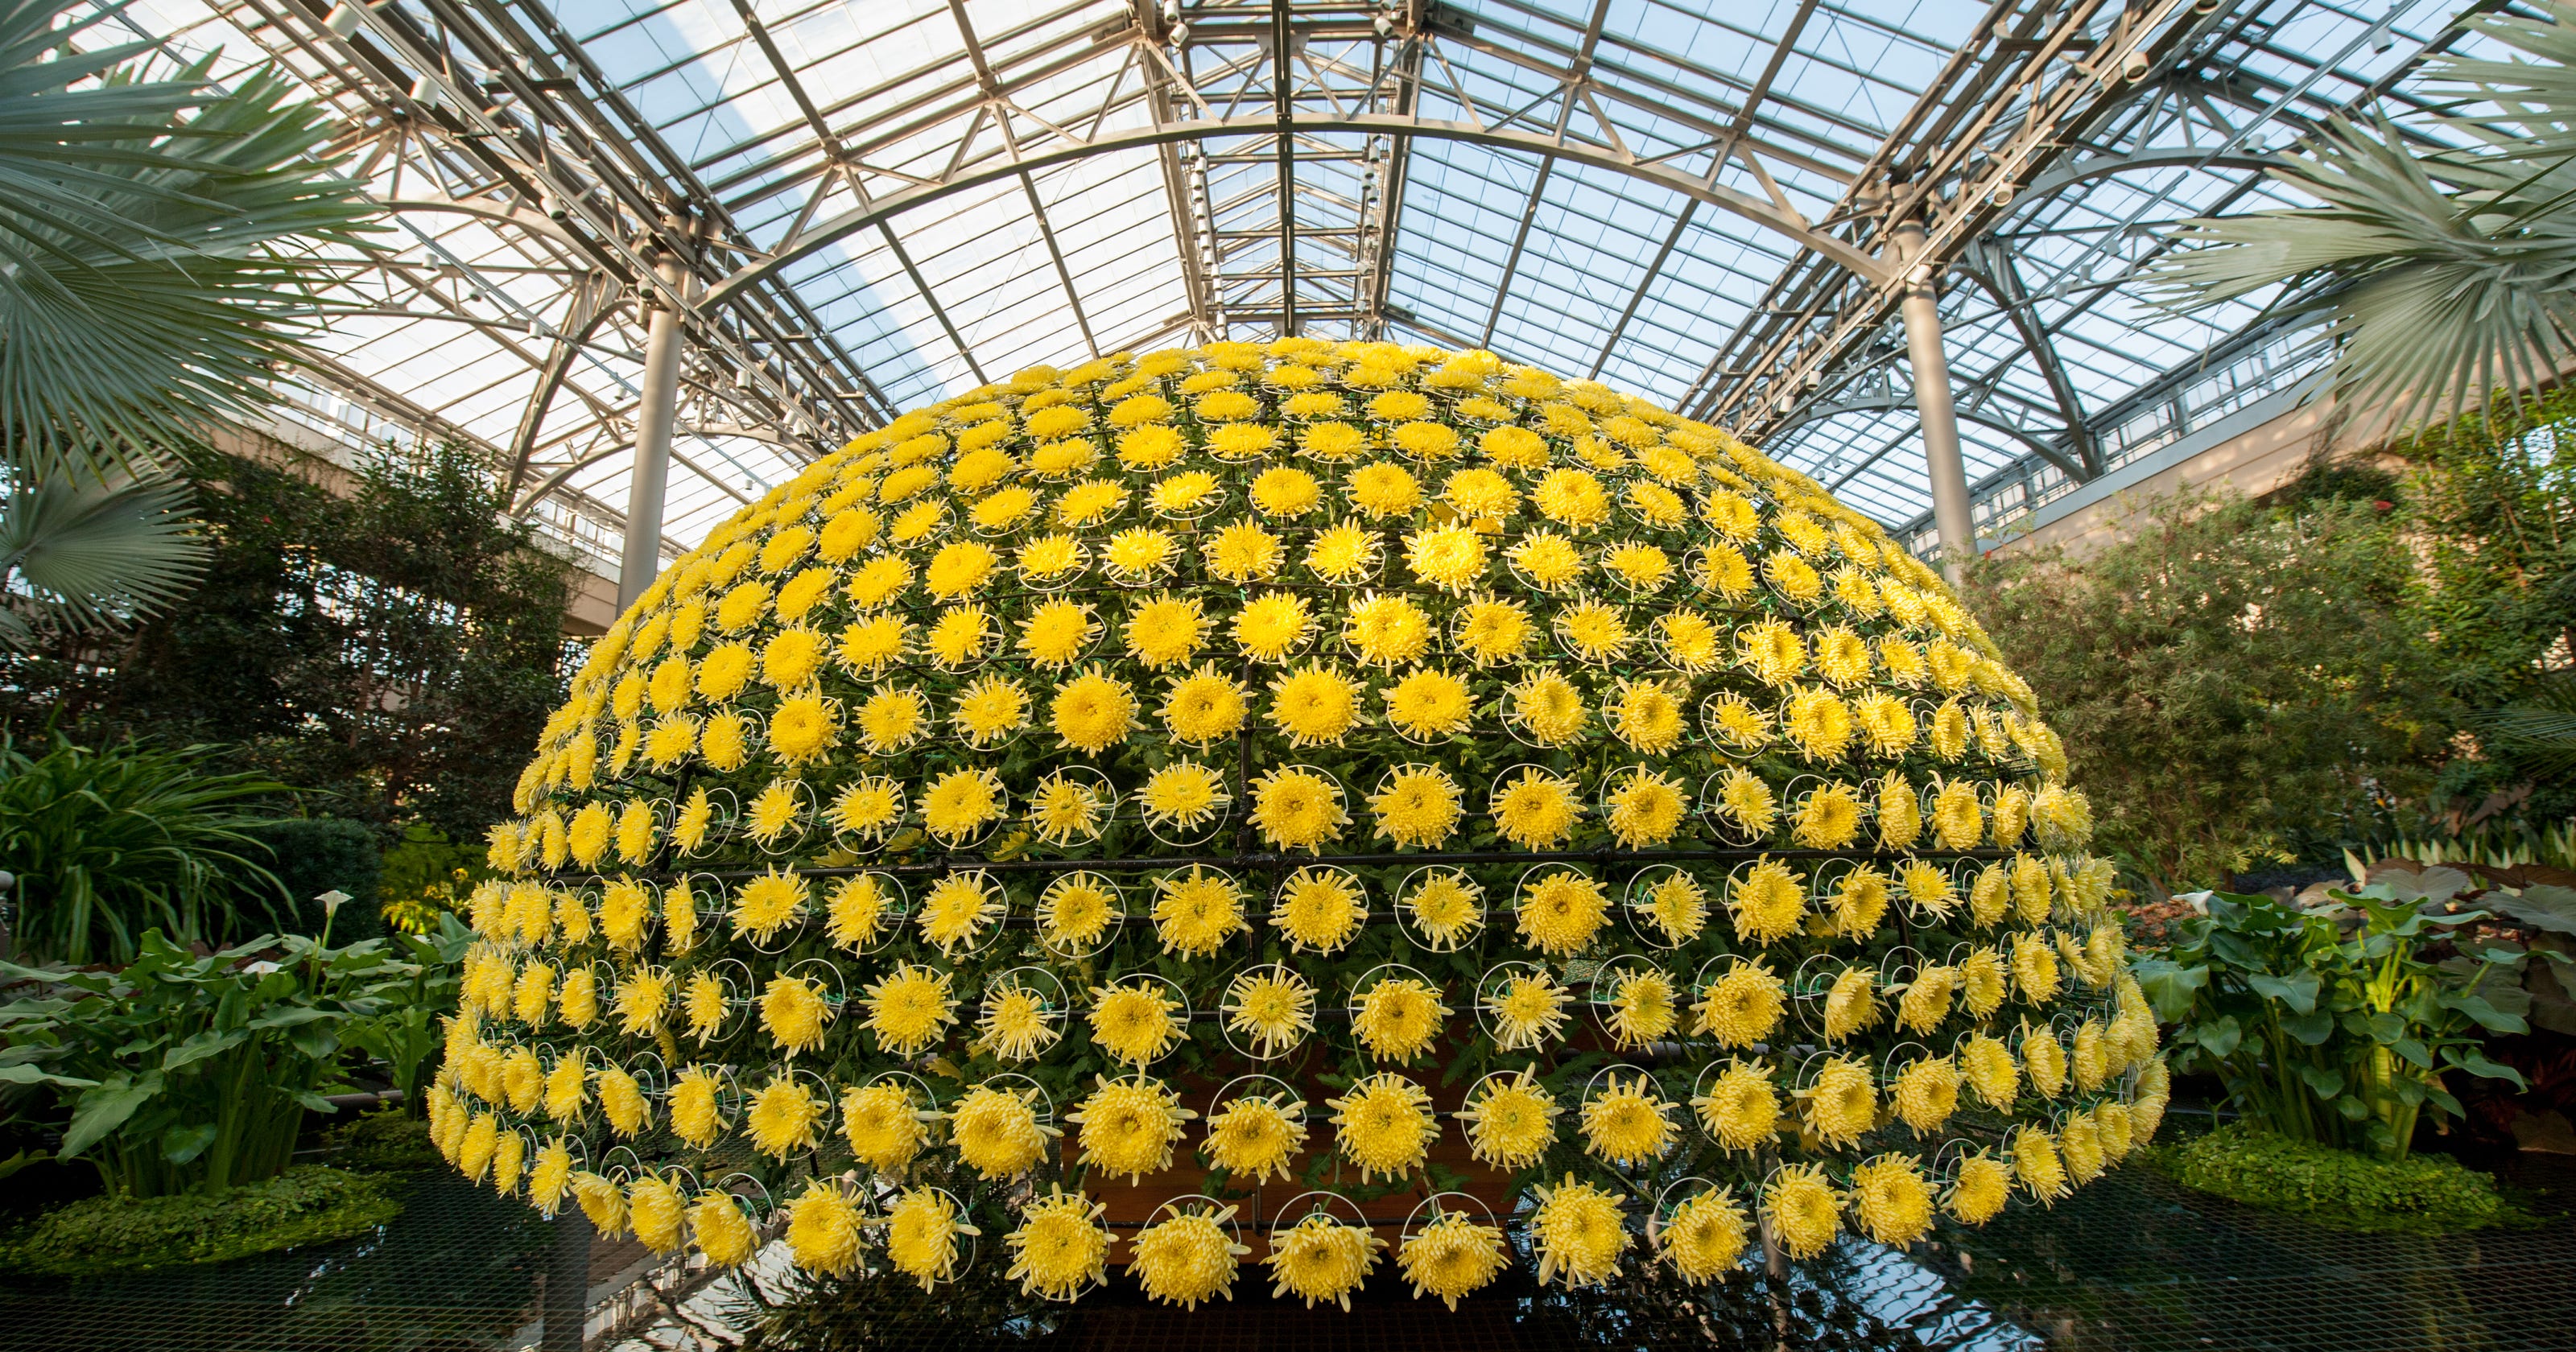 Largest Mum Outside Of Asia At Longwood Gardens